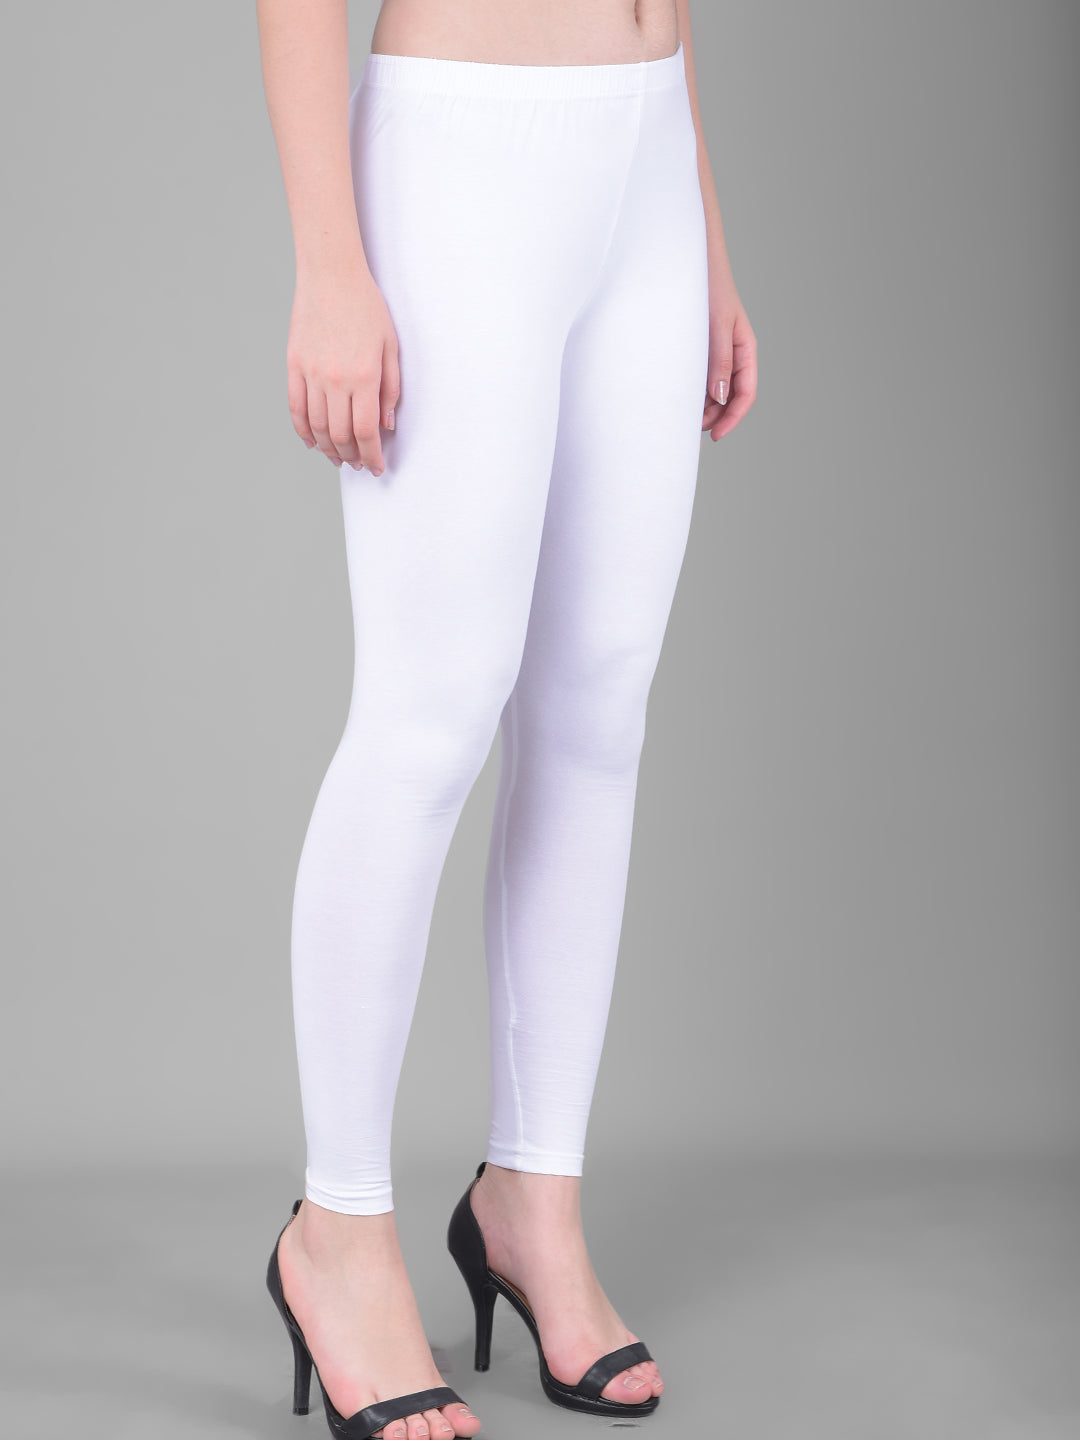 Comfort Lady Stretchable Lycra Leggings, Churidar at Rs 160 in Surat